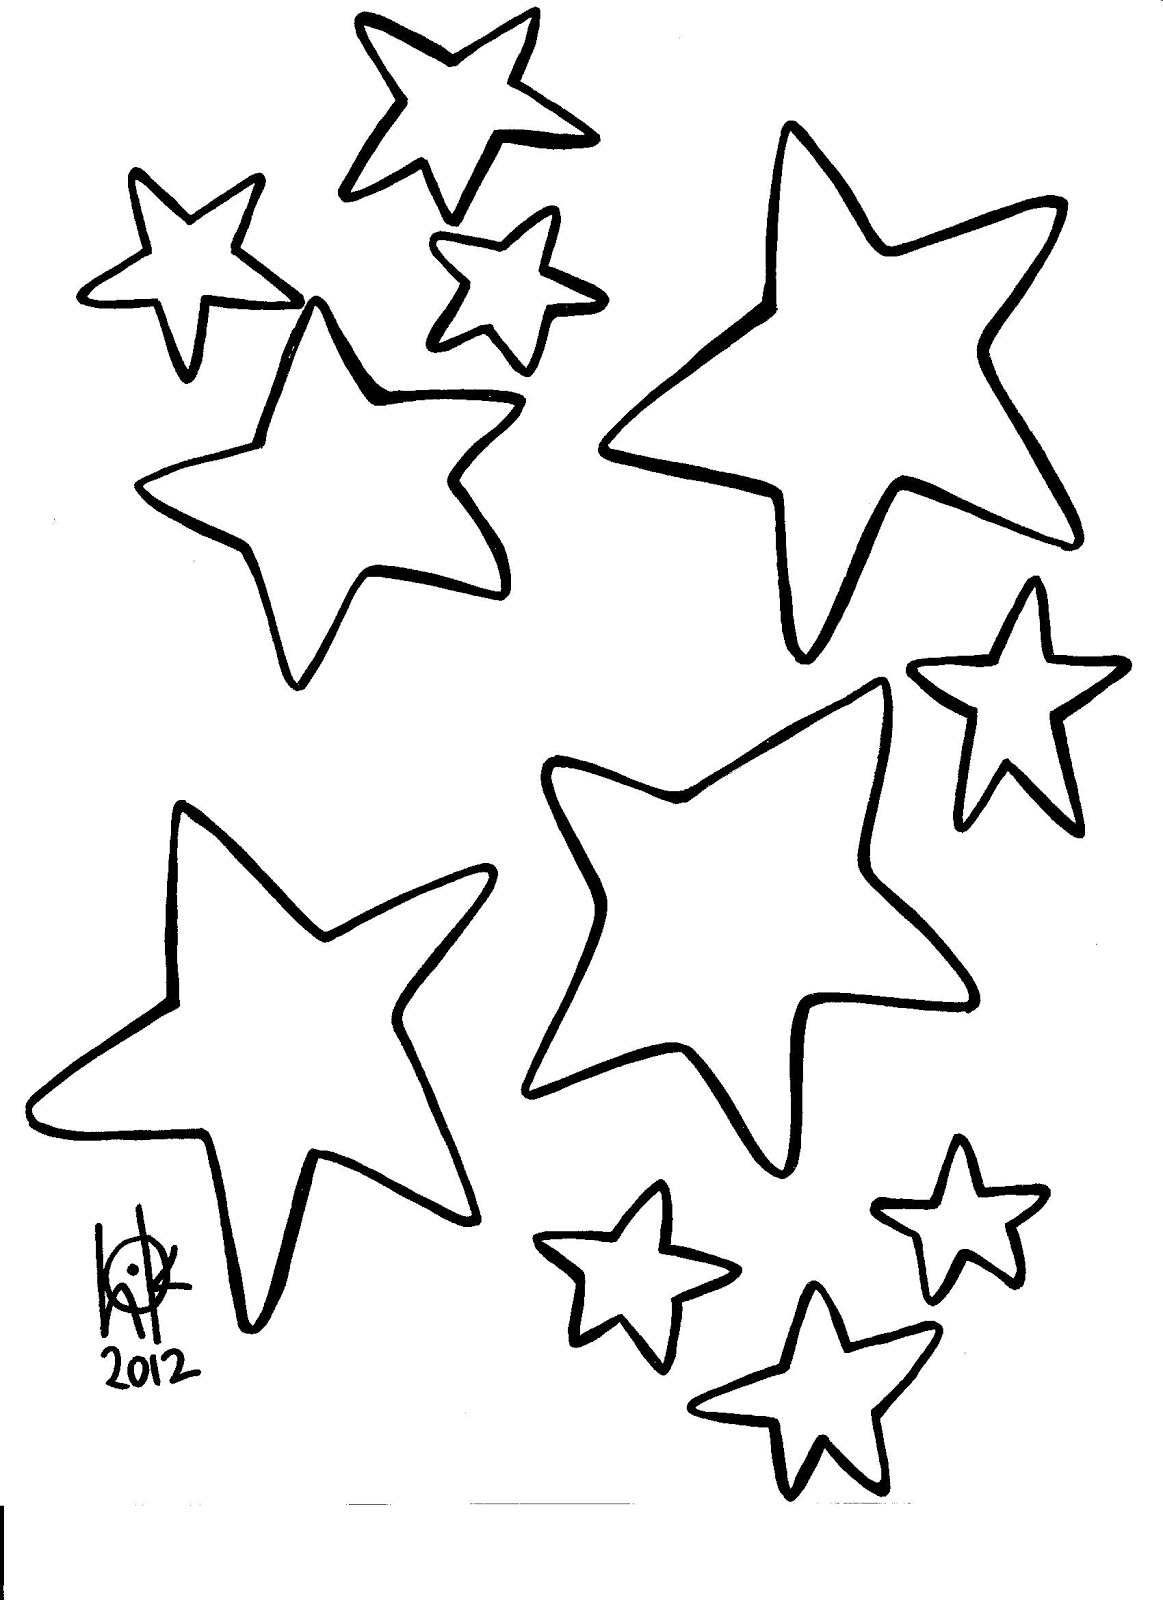 artist holiday: Coloring Book Creation - Clipart library - Clipart library